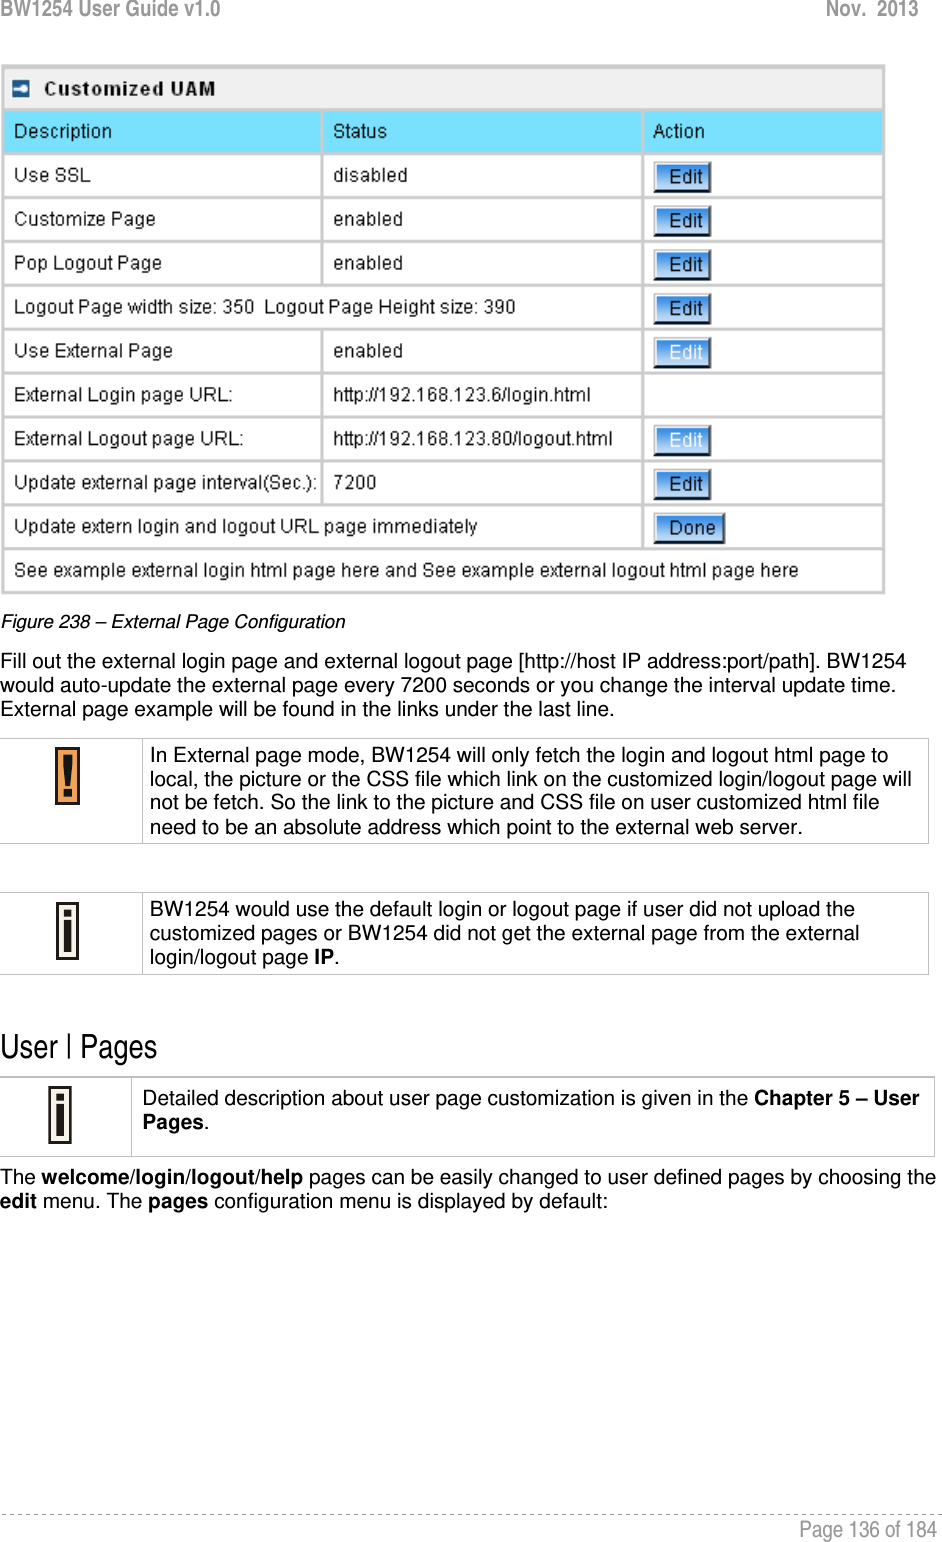 BW1254 User Guide v1.0  Nov.  2013     Page 136 of 184    Figure 238 – External Page Configuration Fill out the external login page and external logout page [http://host IP address:port/path]. BW1254 would auto-update the external page every 7200 seconds or you change the interval update time. External page example will be found in the links under the last line.   User | Pages  Detailed description about user page customization is given in the Chapter 5 – User Pages. The welcome/login/logout/help pages can be easily changed to user defined pages by choosing the edit menu. The pages configuration menu is displayed by default:  In External page mode, BW1254 will only fetch the login and logout html page to local, the picture or the CSS file which link on the customized login/logout page will not be fetch. So the link to the picture and CSS file on user customized html file need to be an absolute address which point to the external web server.  BW1254 would use the default login or logout page if user did not upload the customized pages or BW1254 did not get the external page from the external login/logout page IP. 